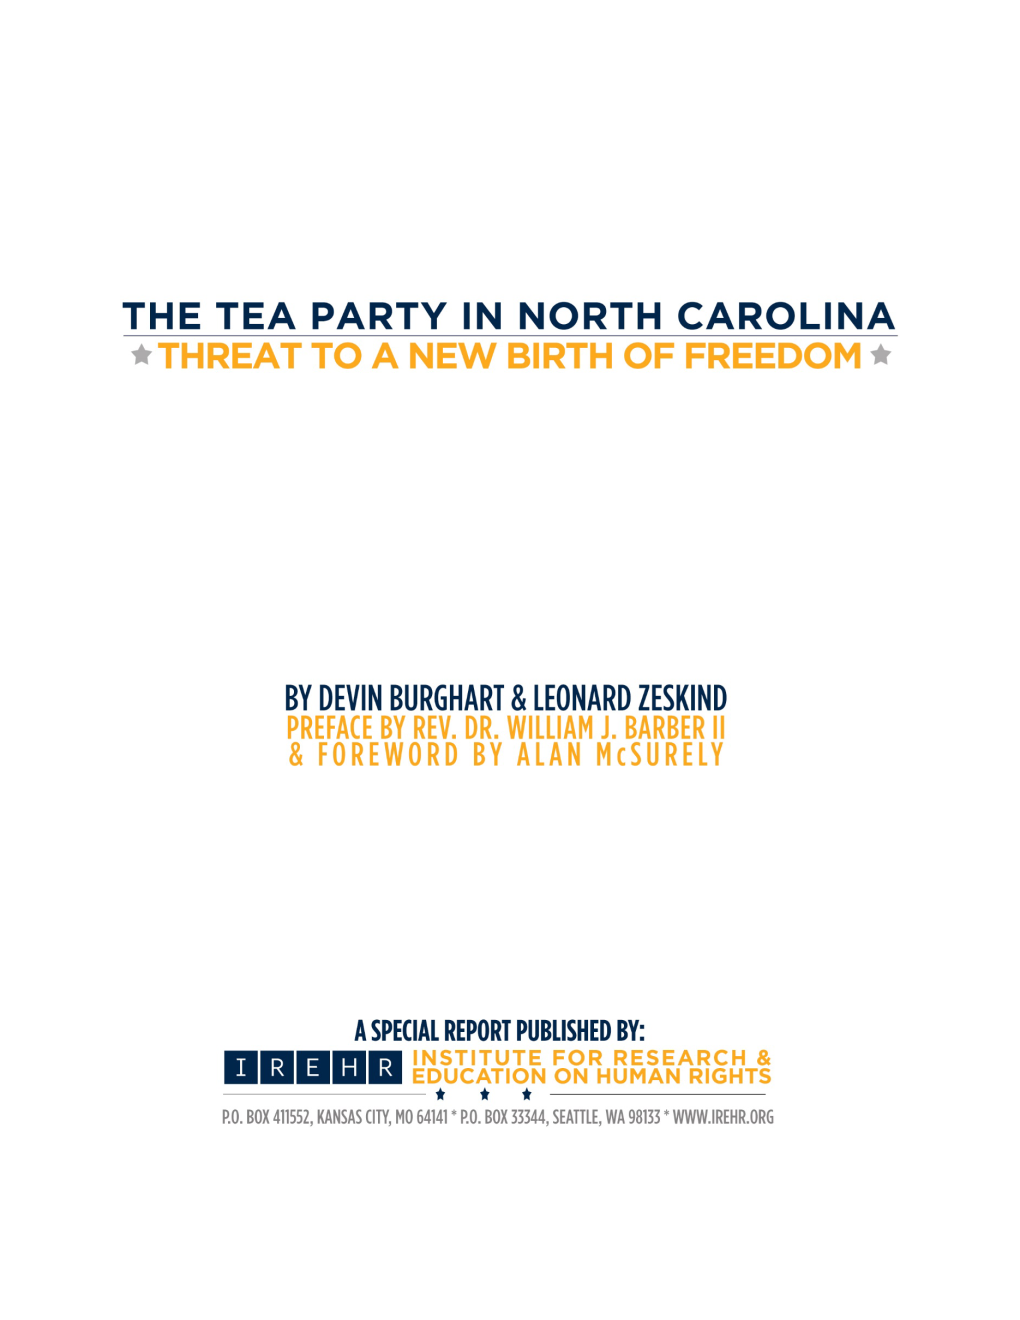 The Tea Party in North Carolina: Threat to a New Birth of Freedom